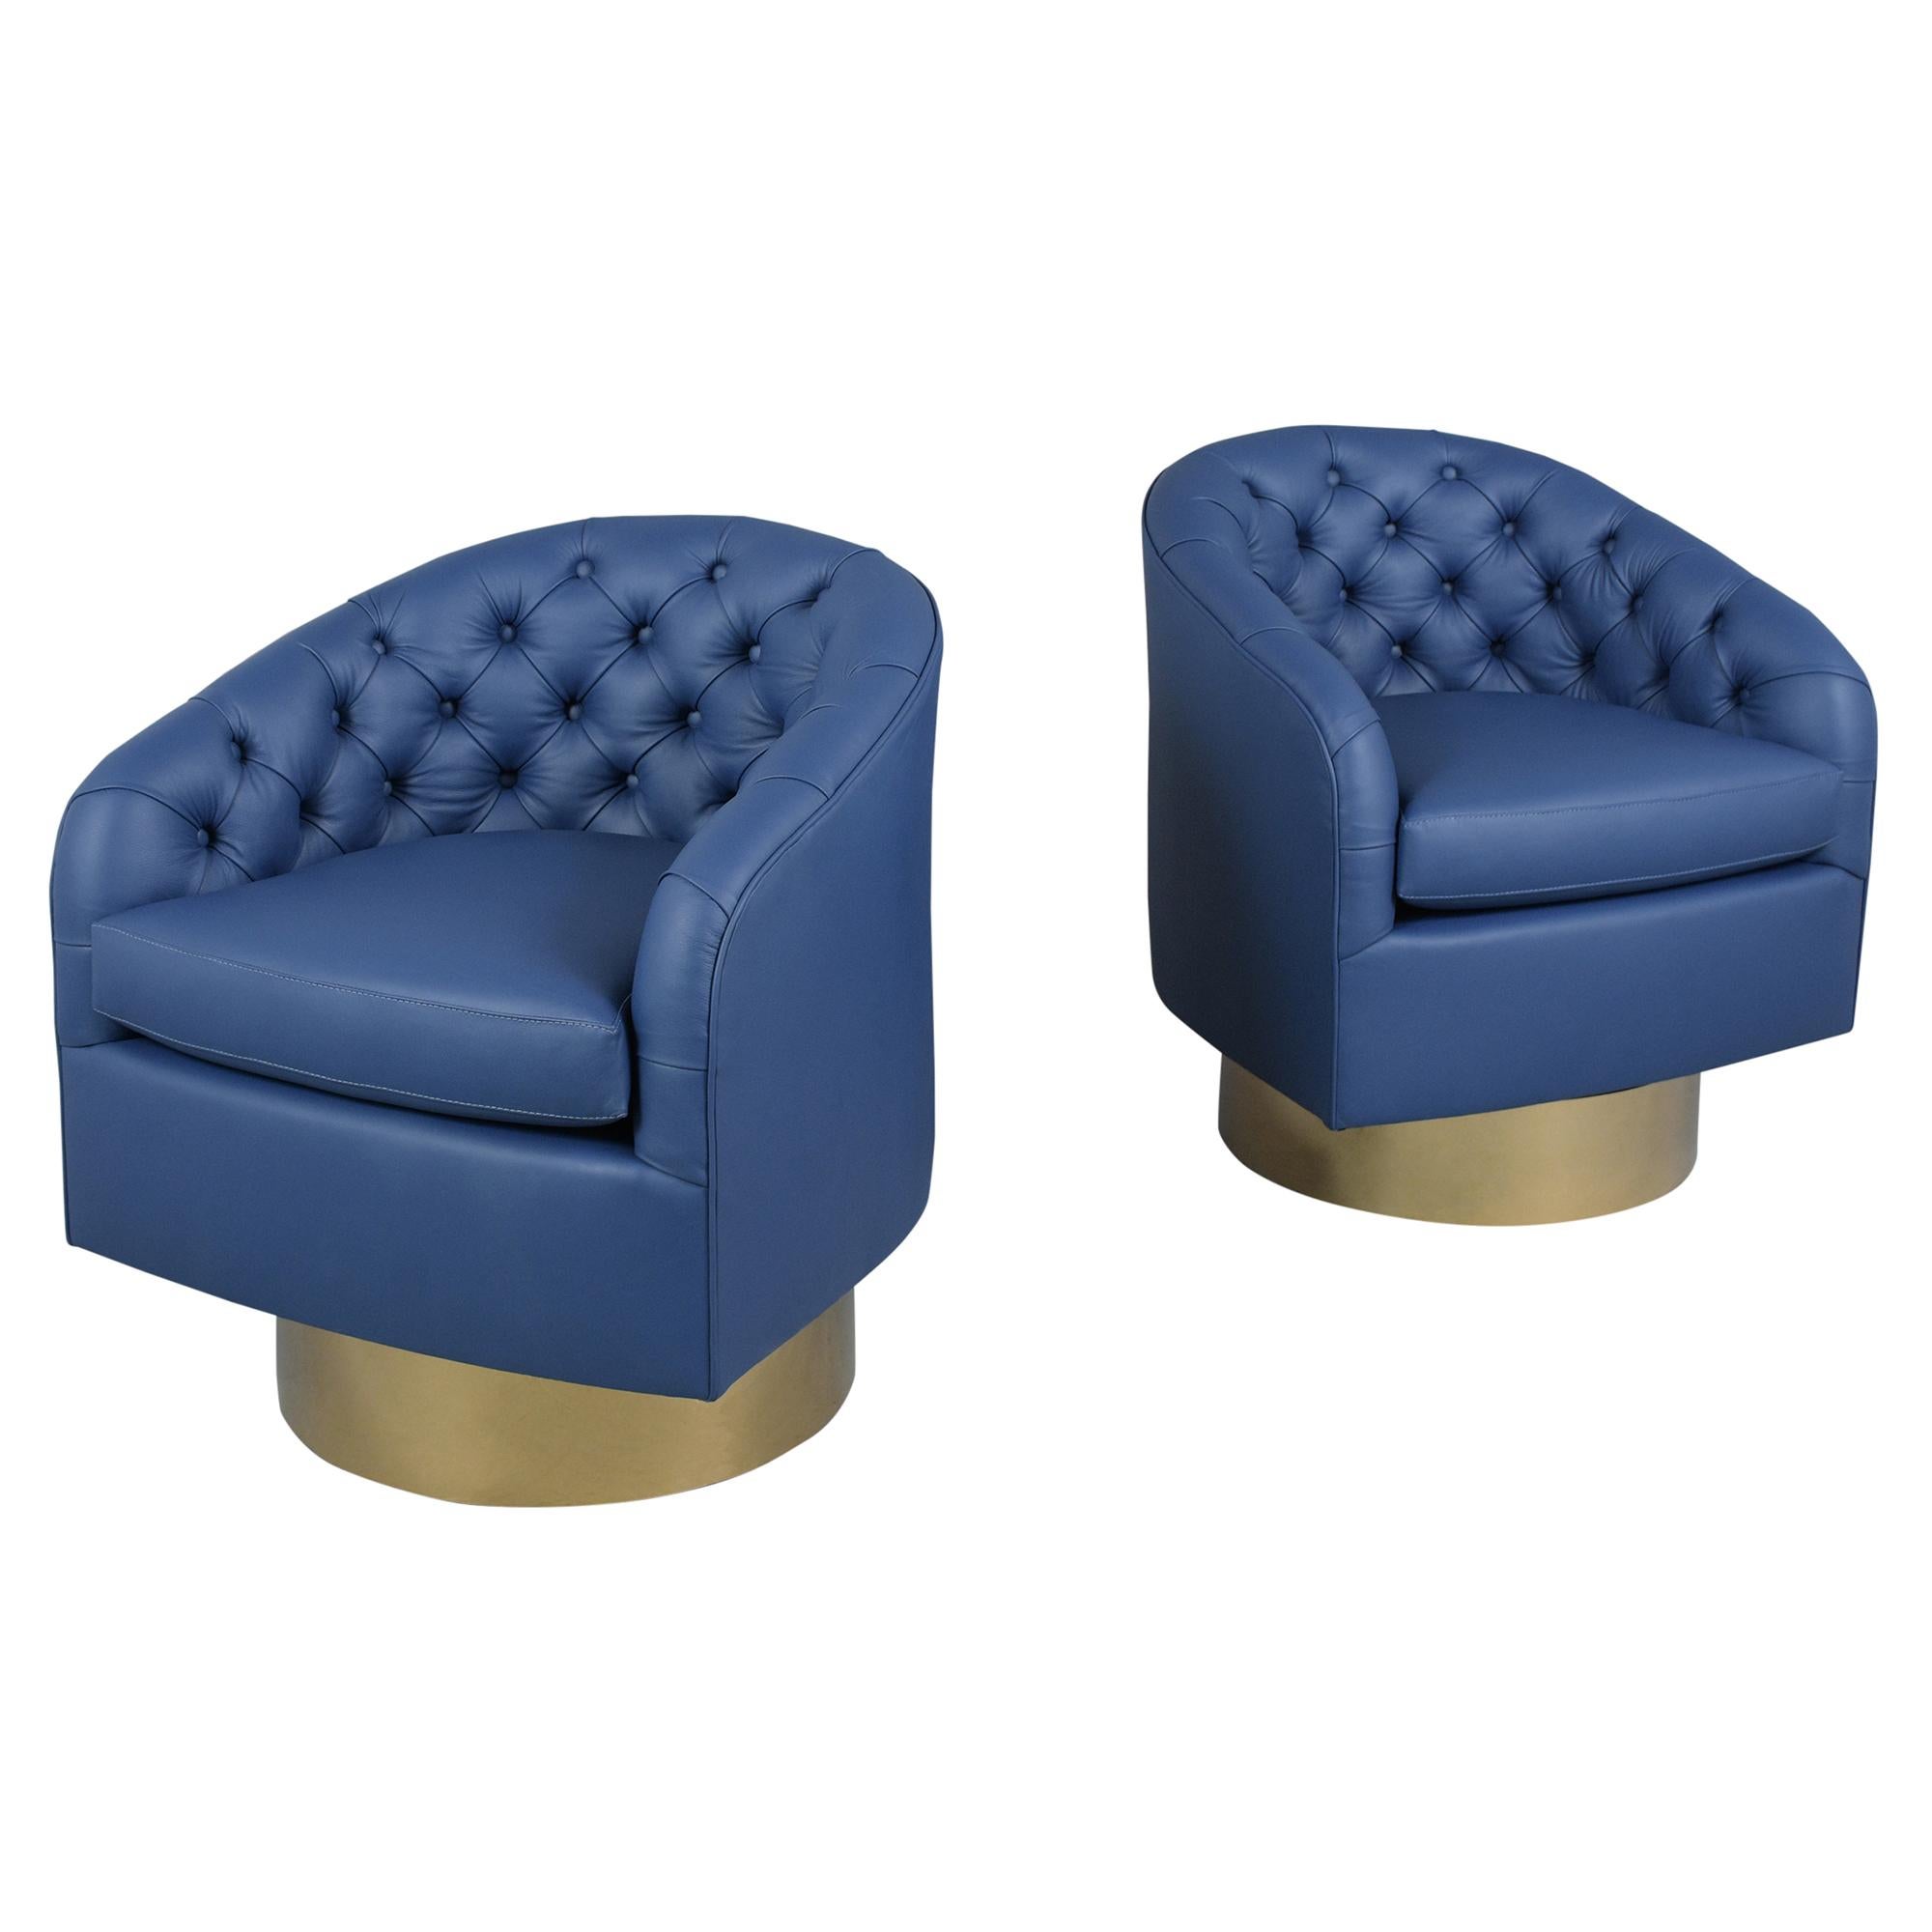 Experience the sophistication of mid-century modern design with our exquisite pair of vintage brass swivel lounge chairs, reminiscent of the iconic work of Milo Baughman. These chairs have undergone a meticulous reupholstering process by our skilled